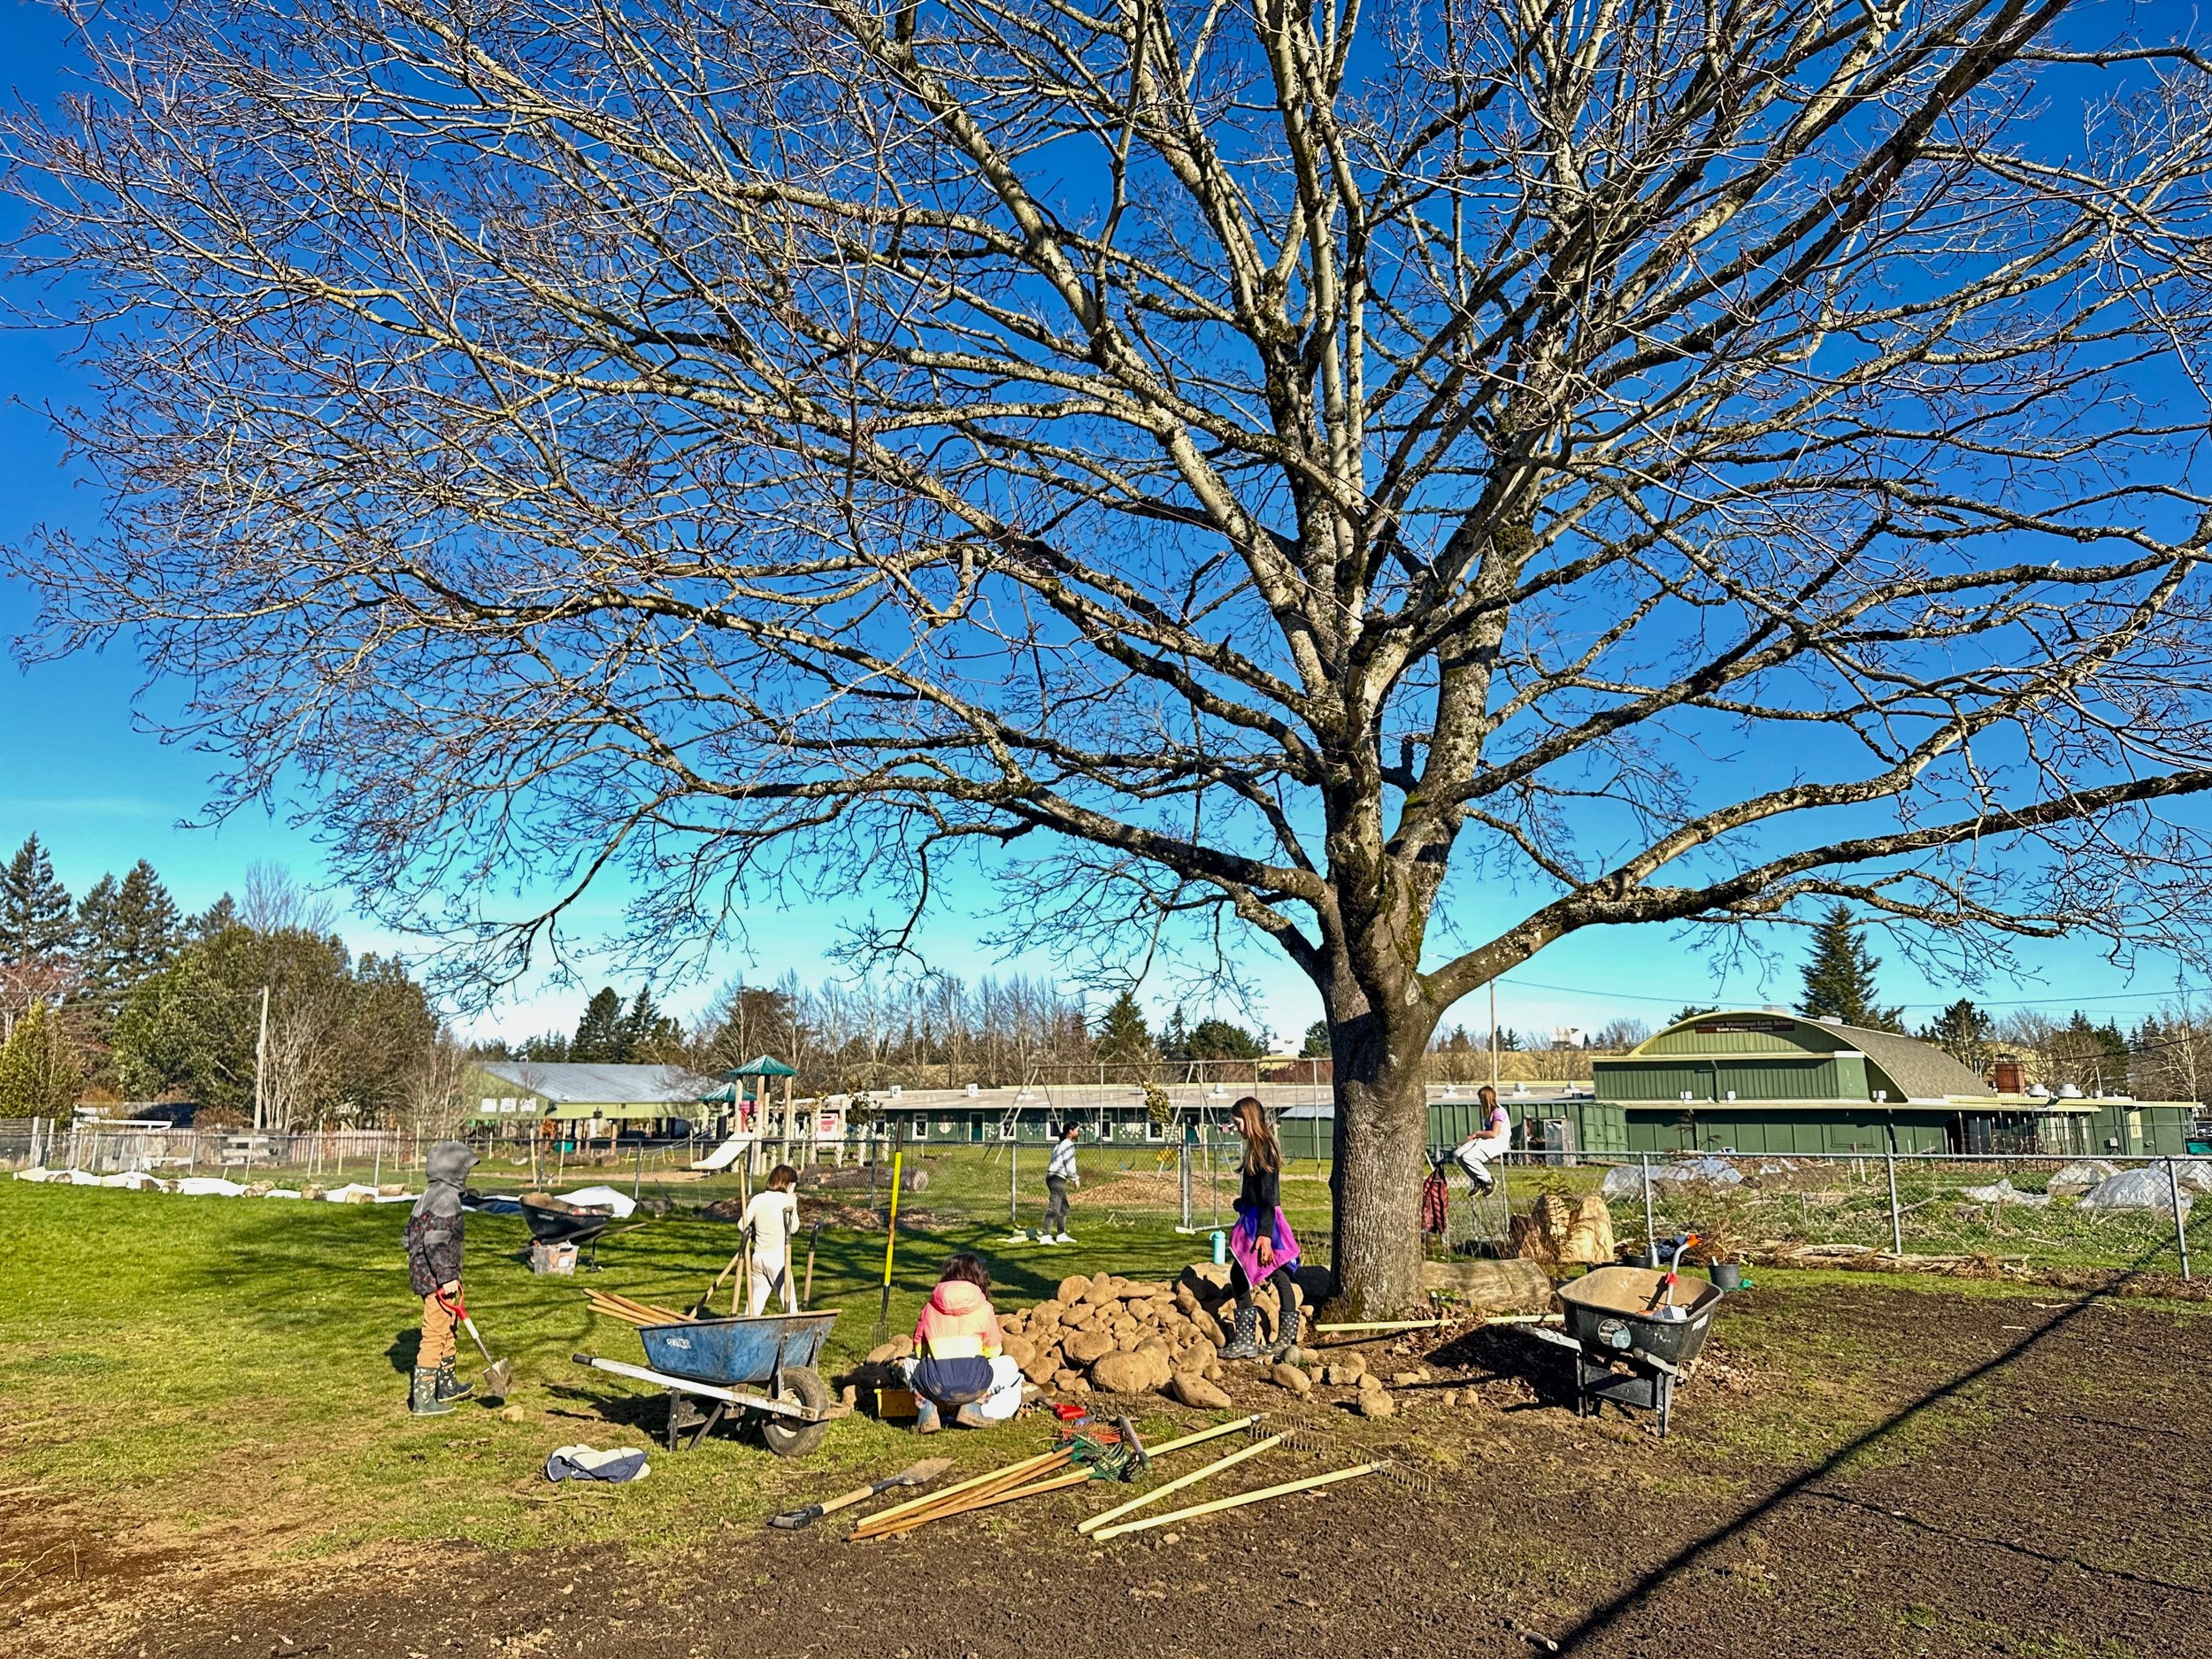 Preparing to plant on a rare sunny day.  School buildings can be seen in the background